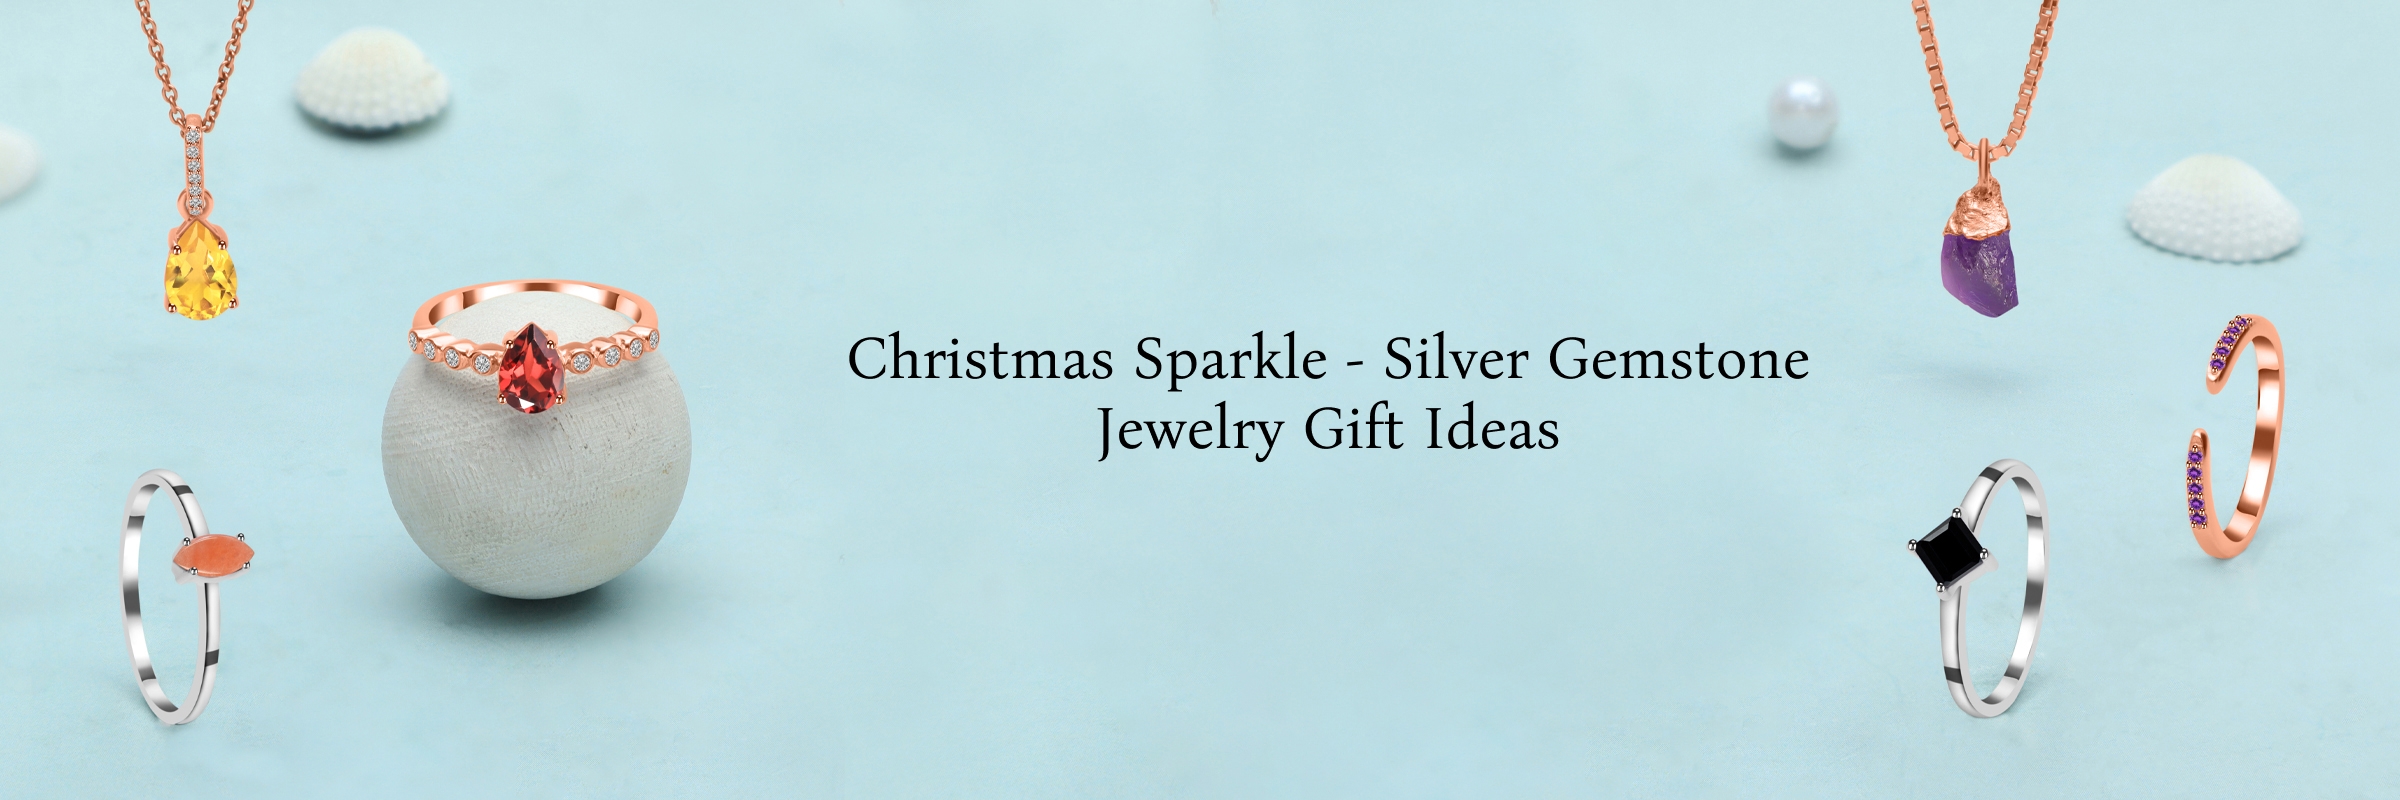 Ultimate Christmas Gift Buying Guide for Silver Gemstone Jewelry